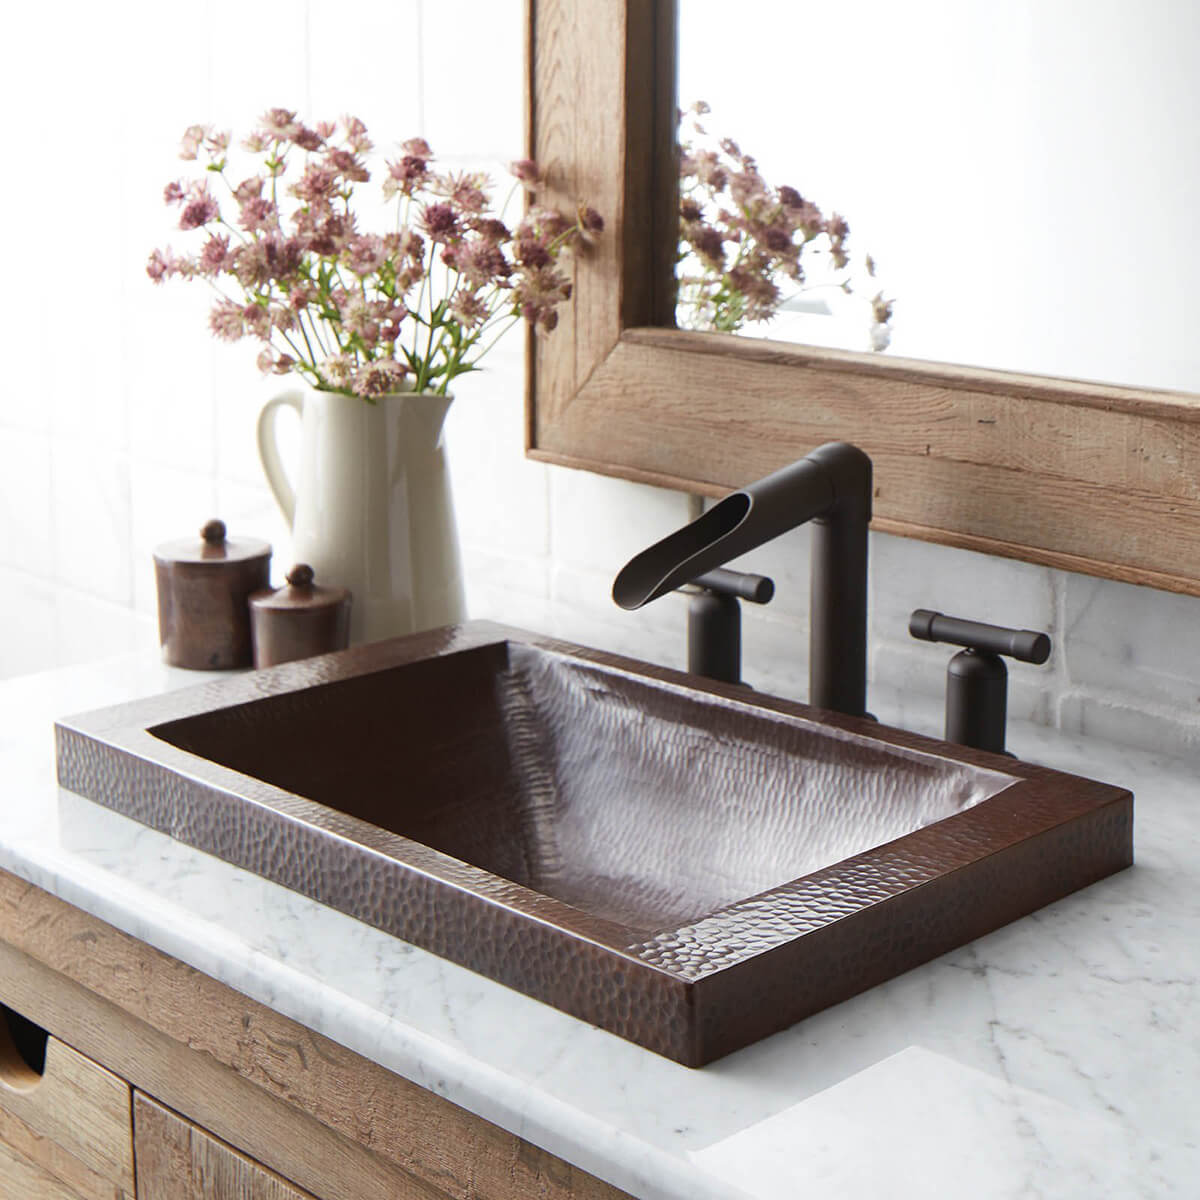 Standout and Unique Brass-Inspired Basin